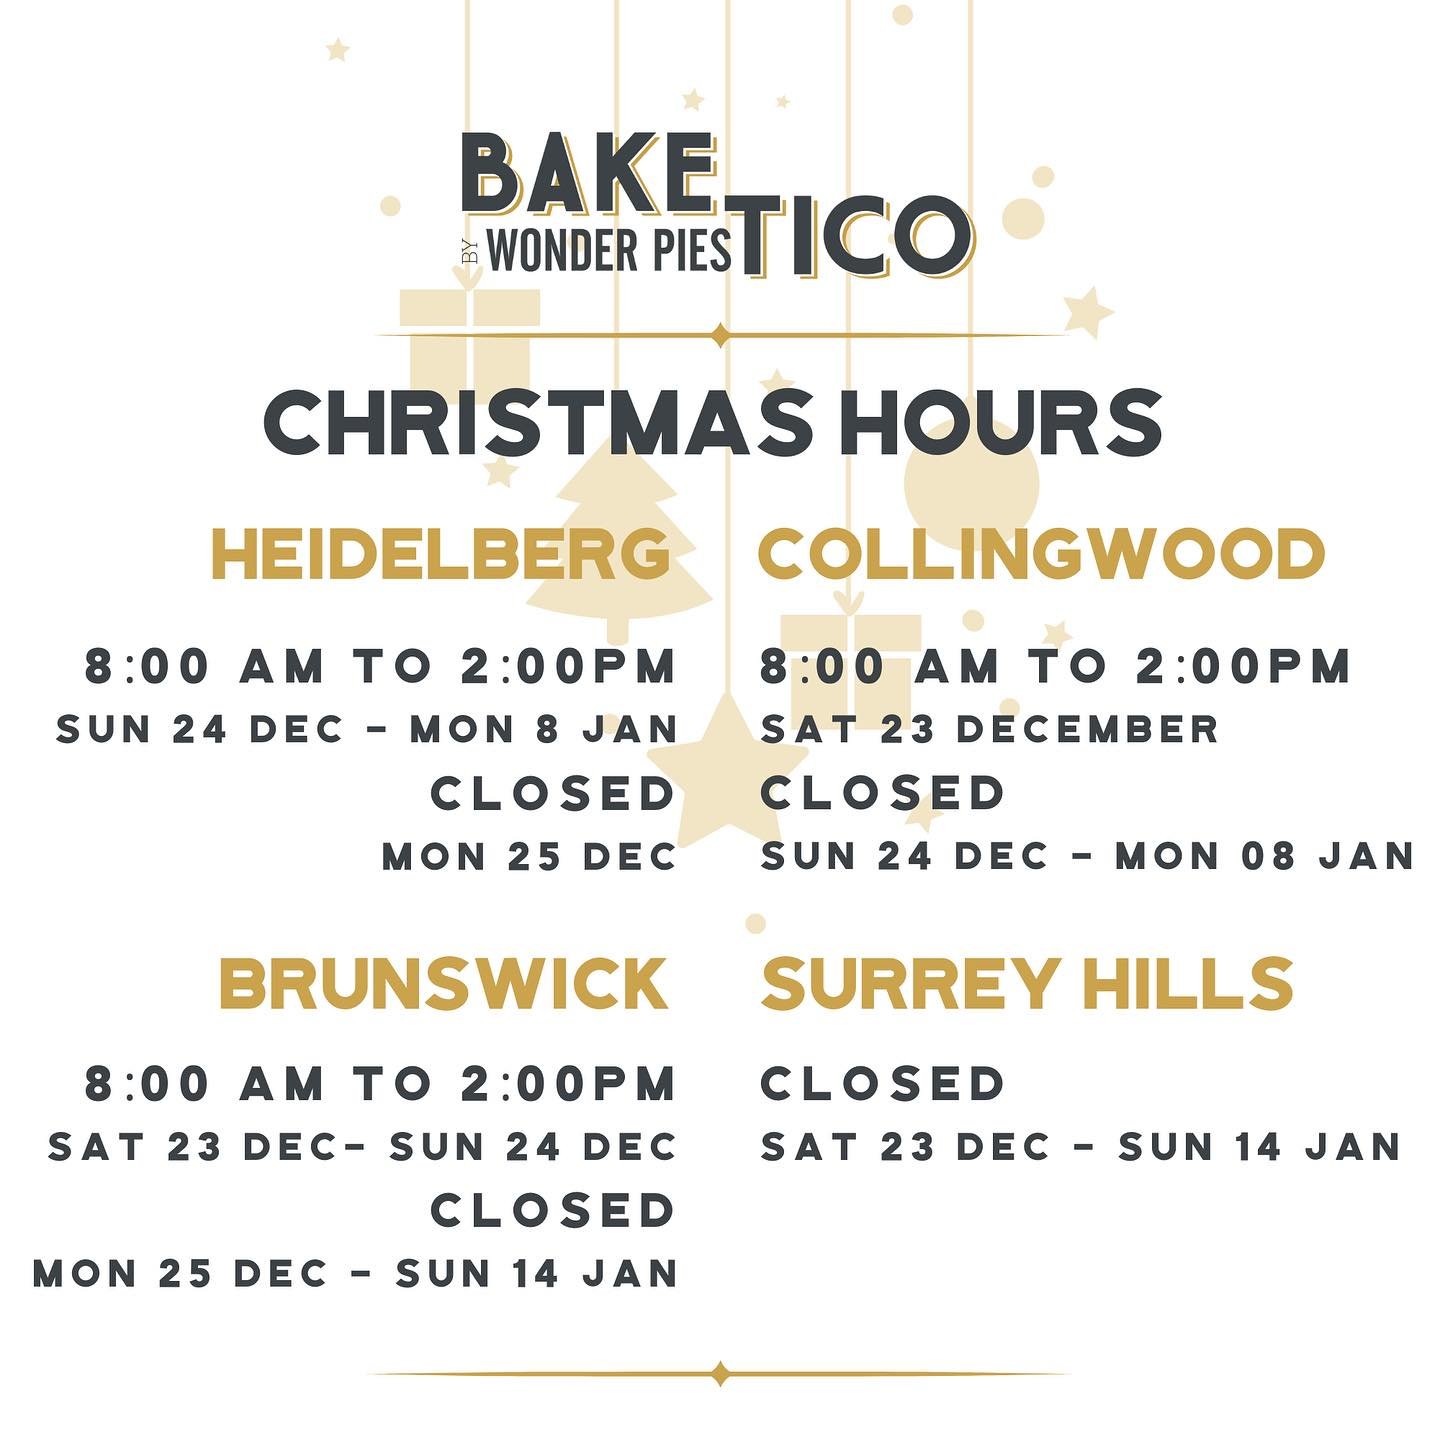 Trading hours for this holiday season! 🎄